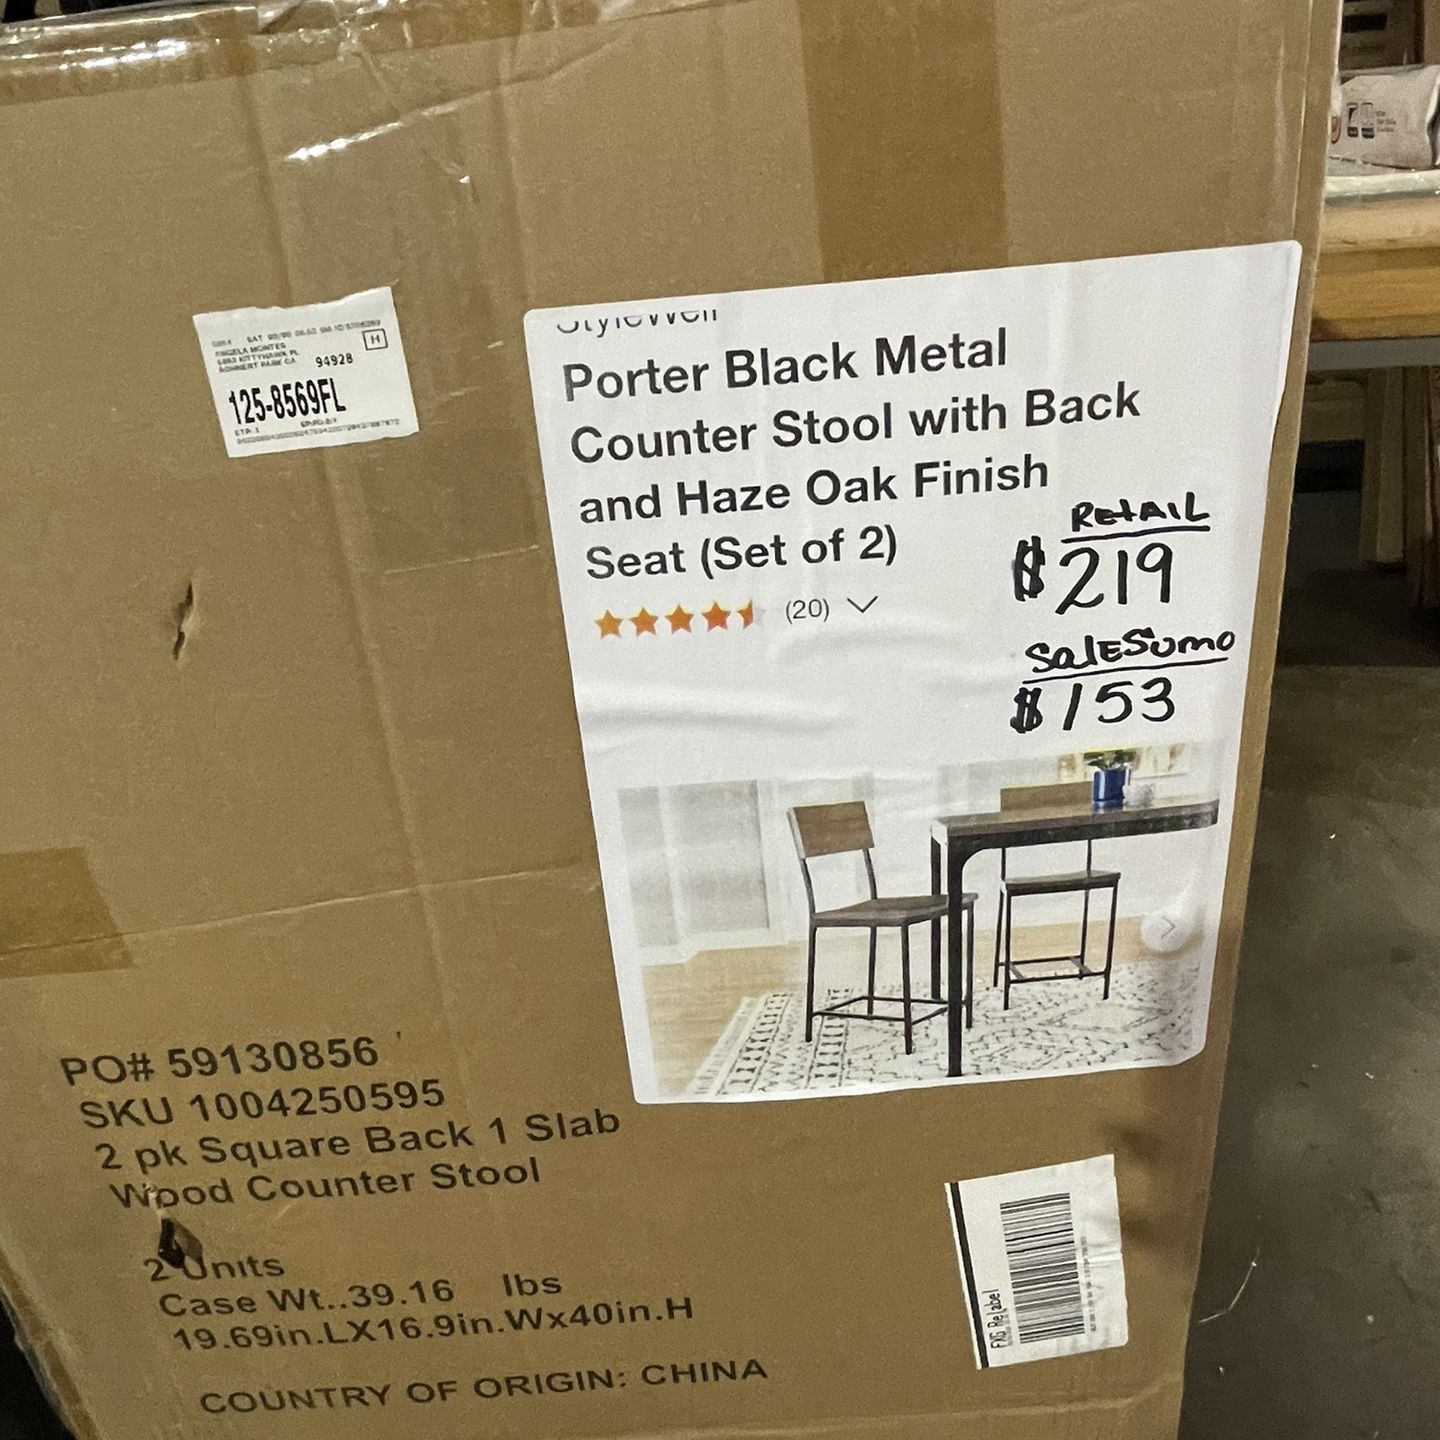 Porter Black Metal Counter Stool with Back and Haze Oak Finish Seat (Set of 2) 